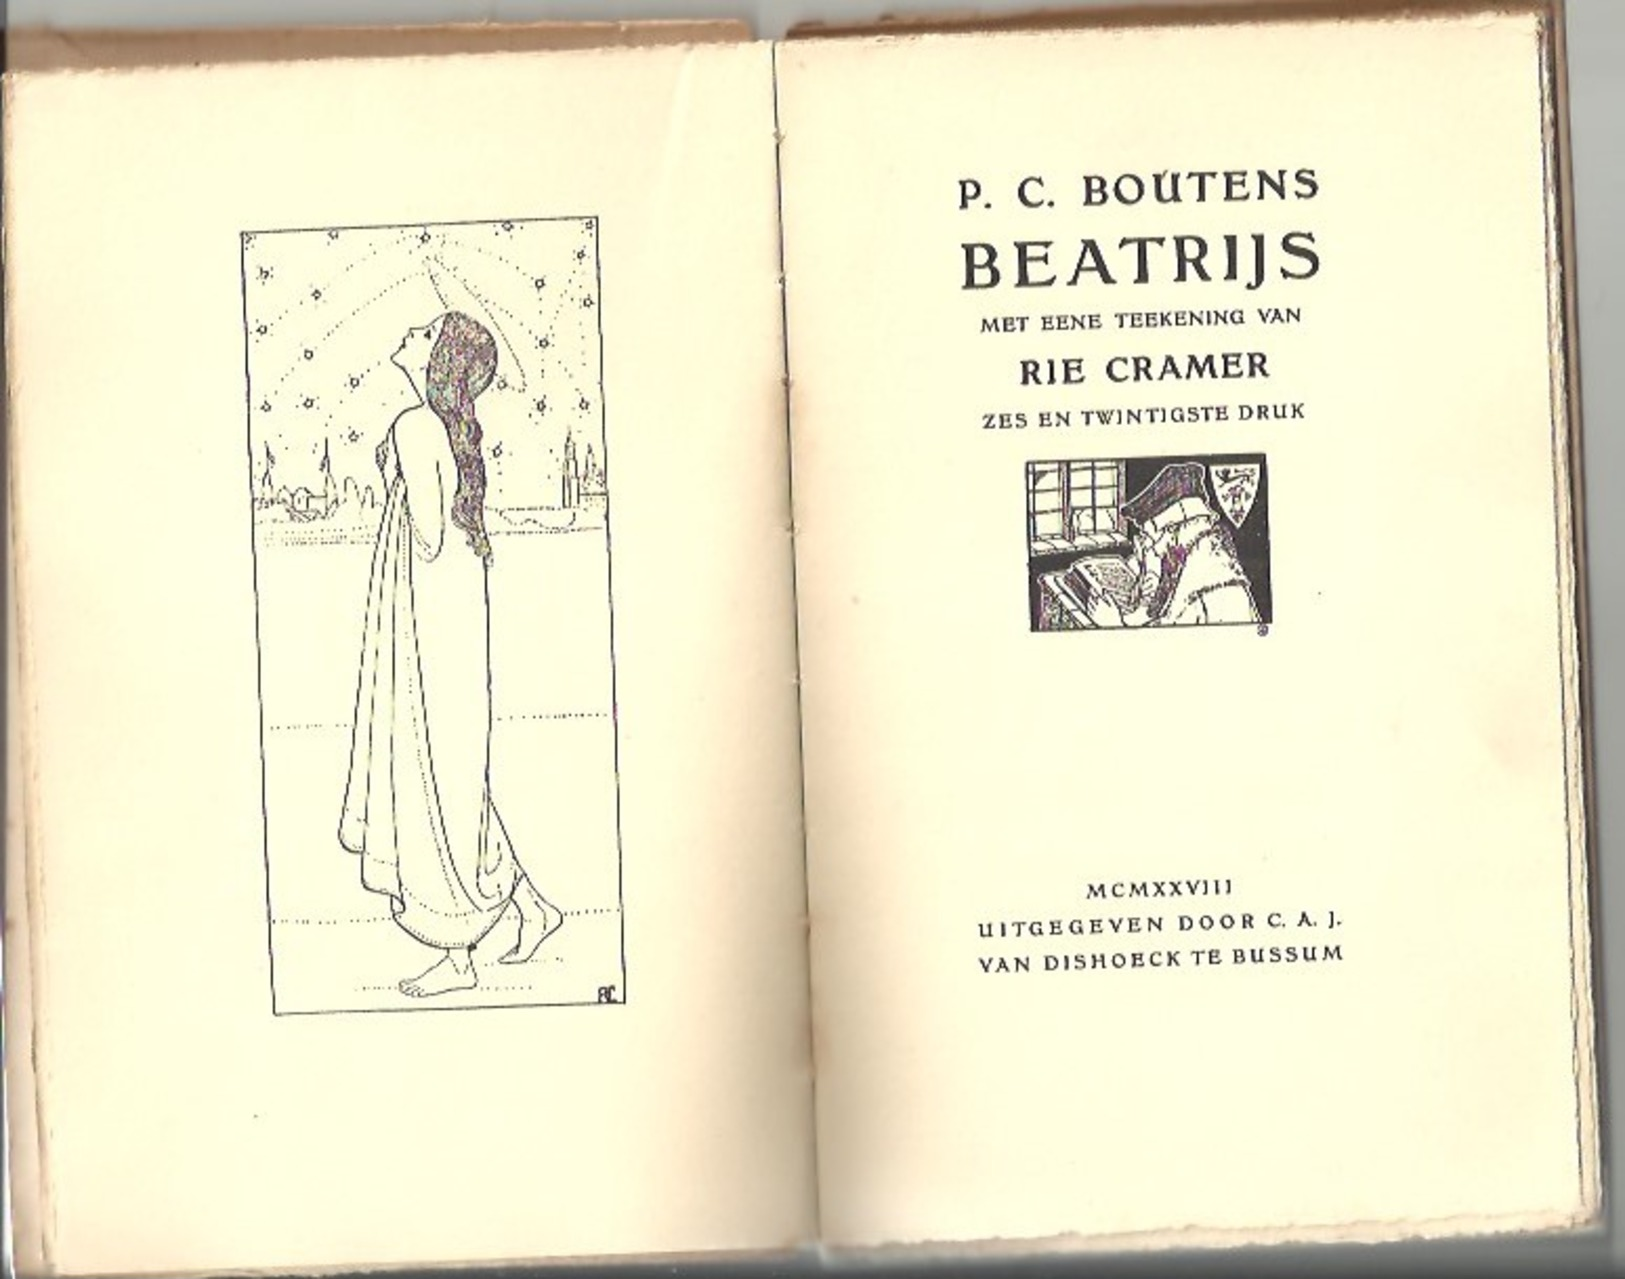 Beatrys - P.C. Boutens     1928 - Literature